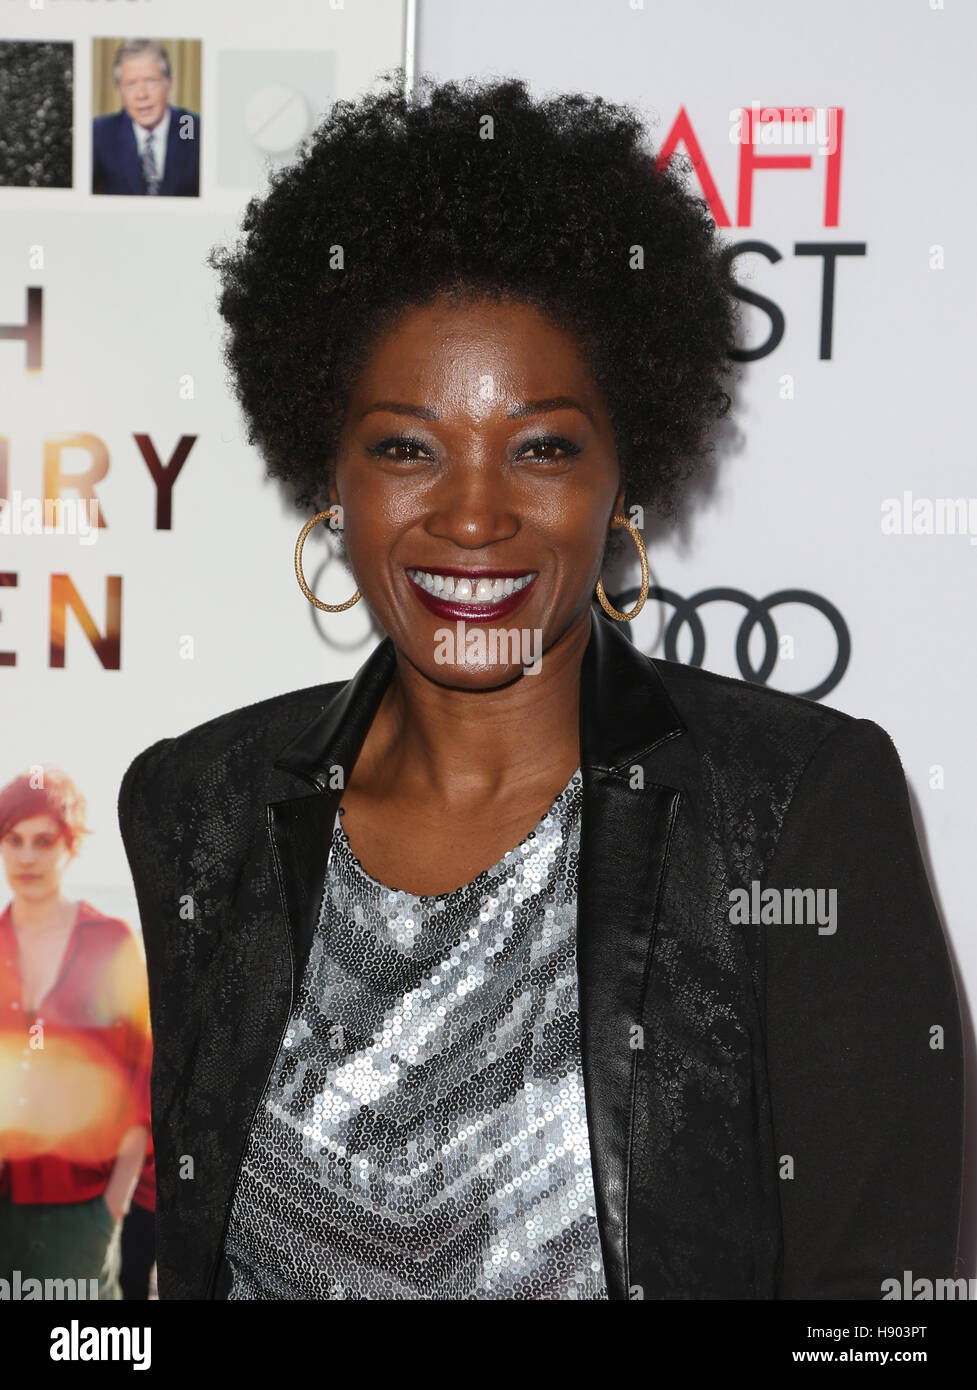 Hollywood, USA. 16th Nov, 2016. Yolanda Ross, At AFI FEST 2016 Presented By Audi - A Tribute To Annette Bening And Gala Screening Of A24's '20th Century Women' At The TCL Chinese Theatre, California on November 16, 2016. © Faye Sadou/Media Punch/Alamy Liv Stock Photo